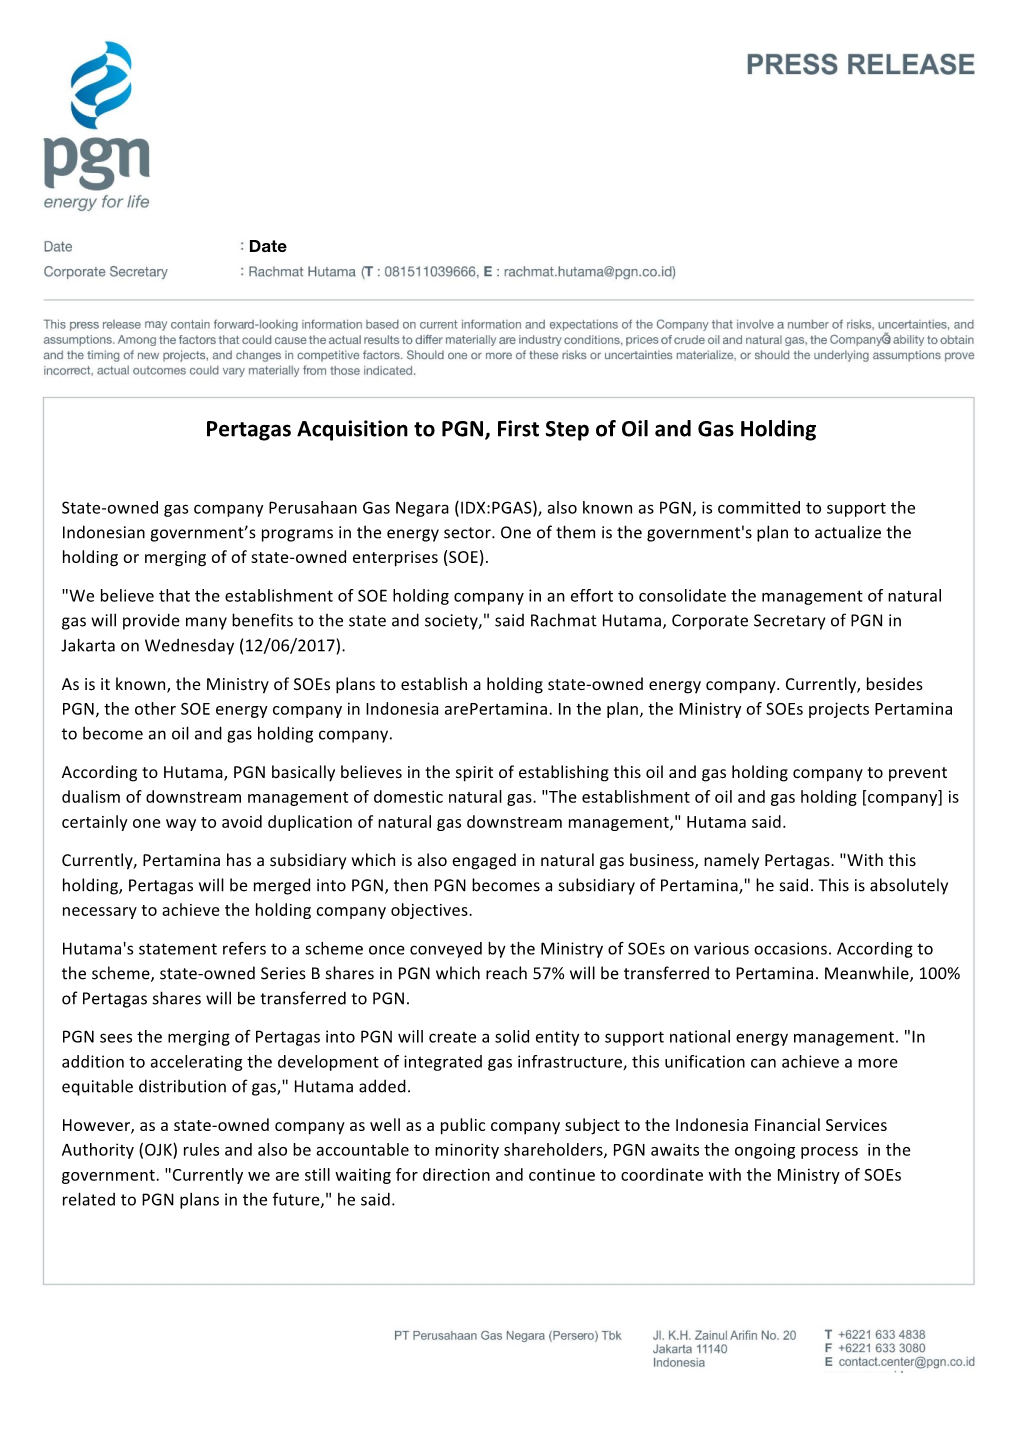 Pertagas Acquisition to PGN, First Step of Oil and Gas Holding